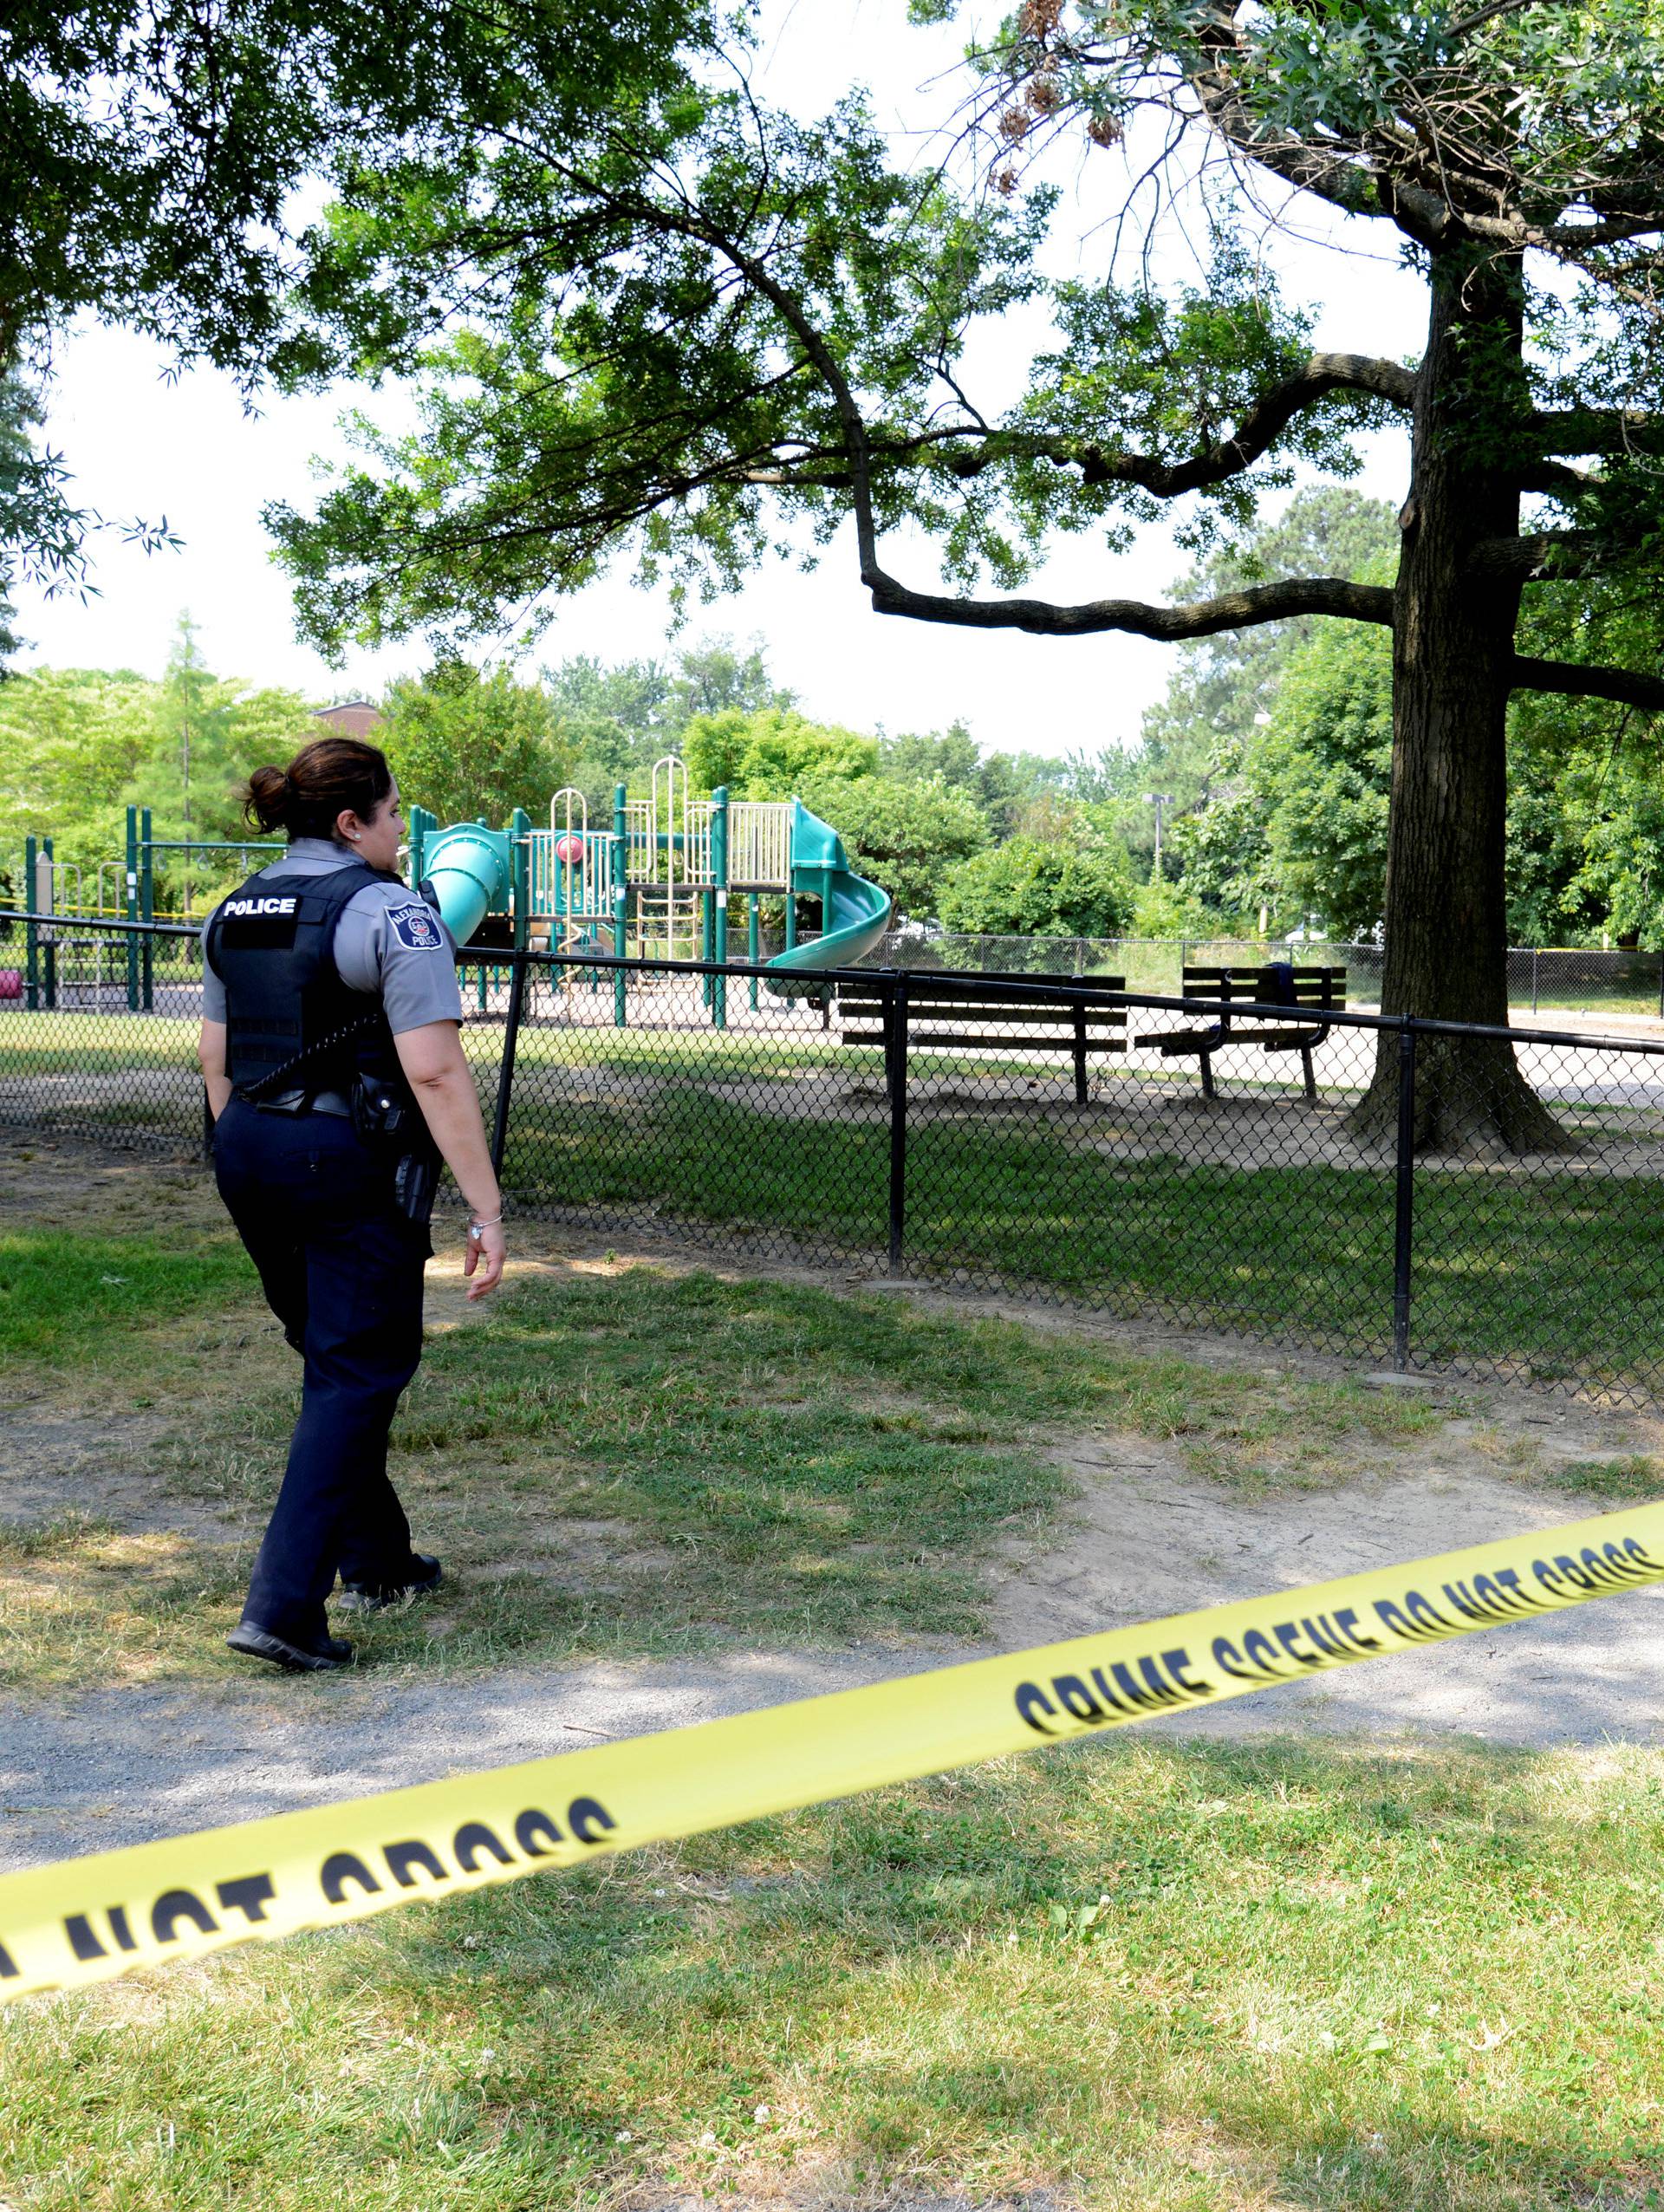 Police put up tape to clear journalists from the outfield area of a baseball field where shots were fired during a congressional baseball practice in Alexandria